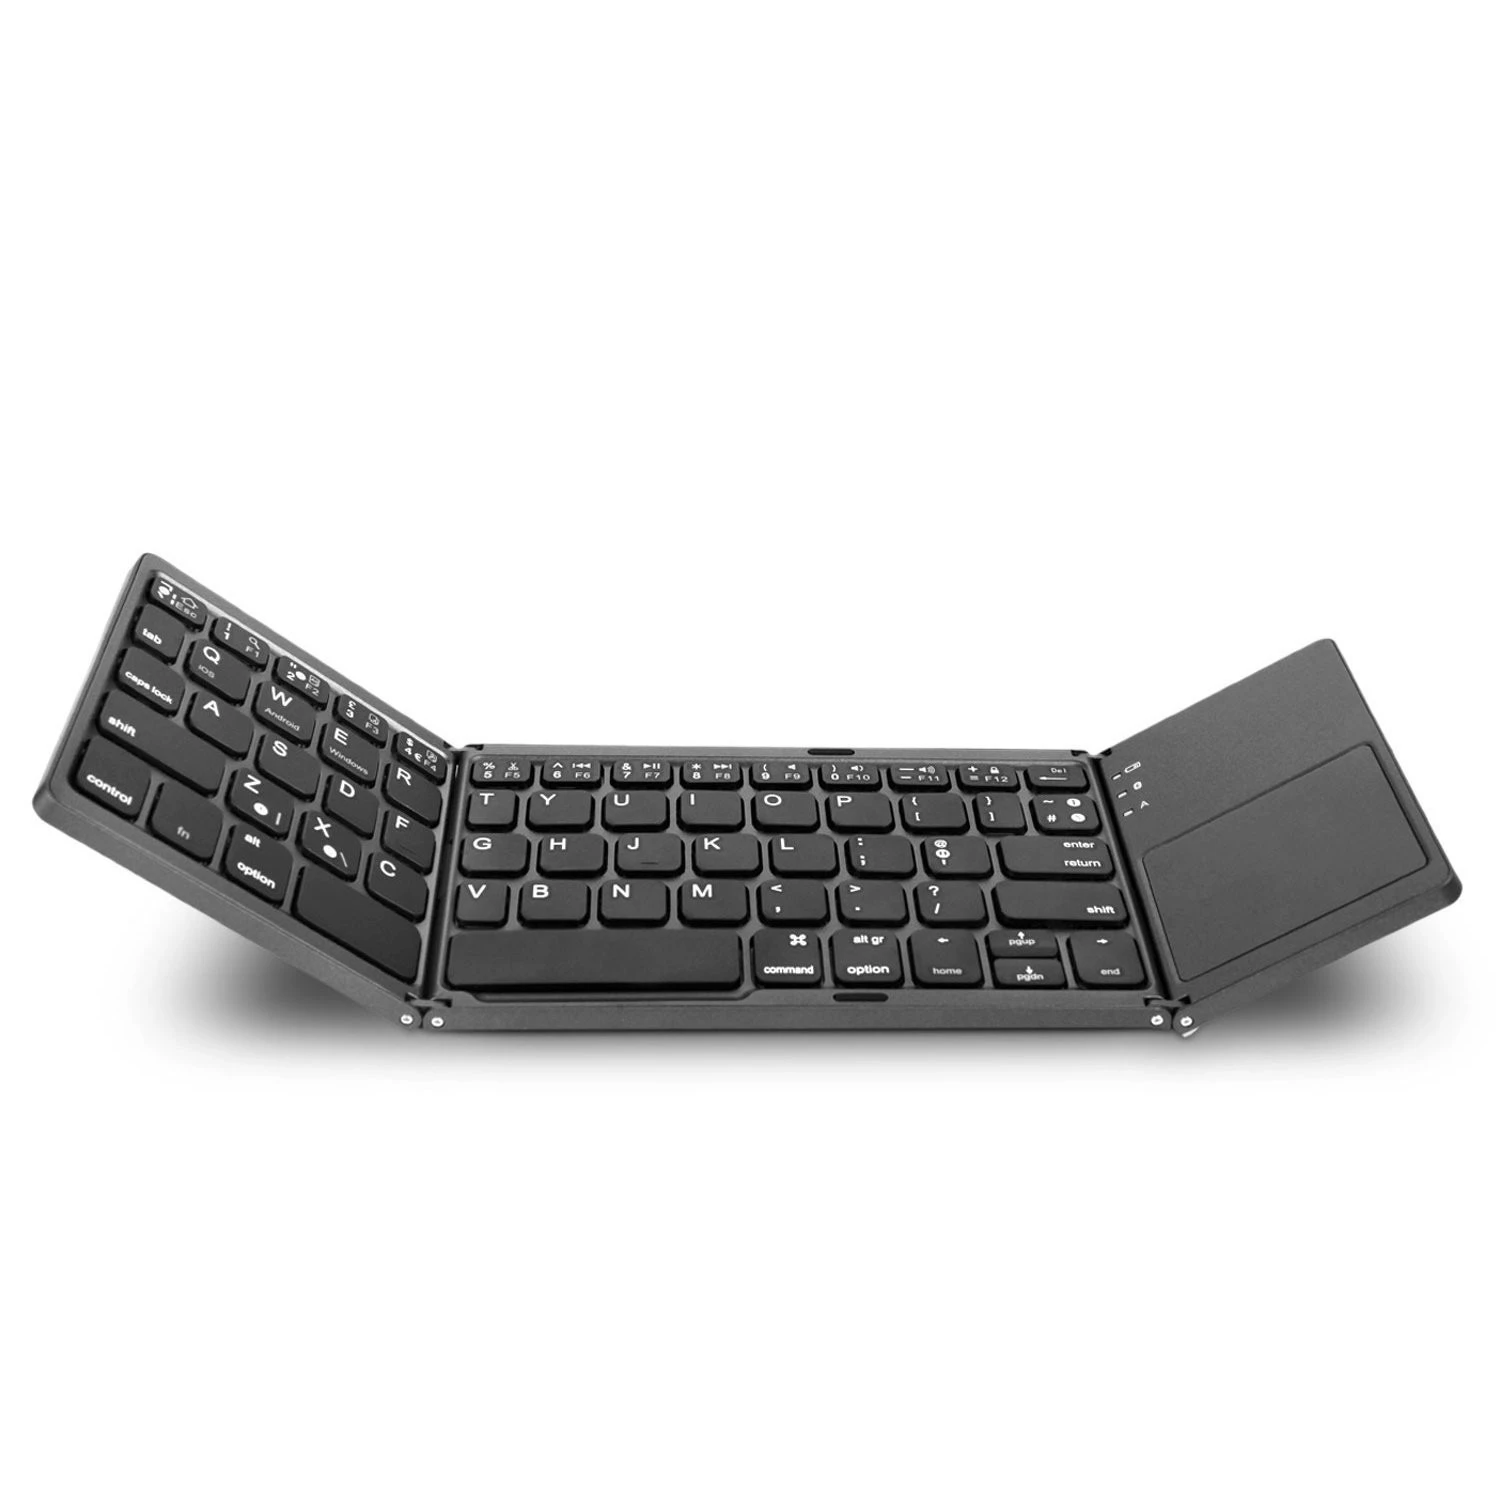 Portable Folding Wireless Bluetooth Keyboard EC Technology With Touchpad For ipad Tablet Smartphone Computer